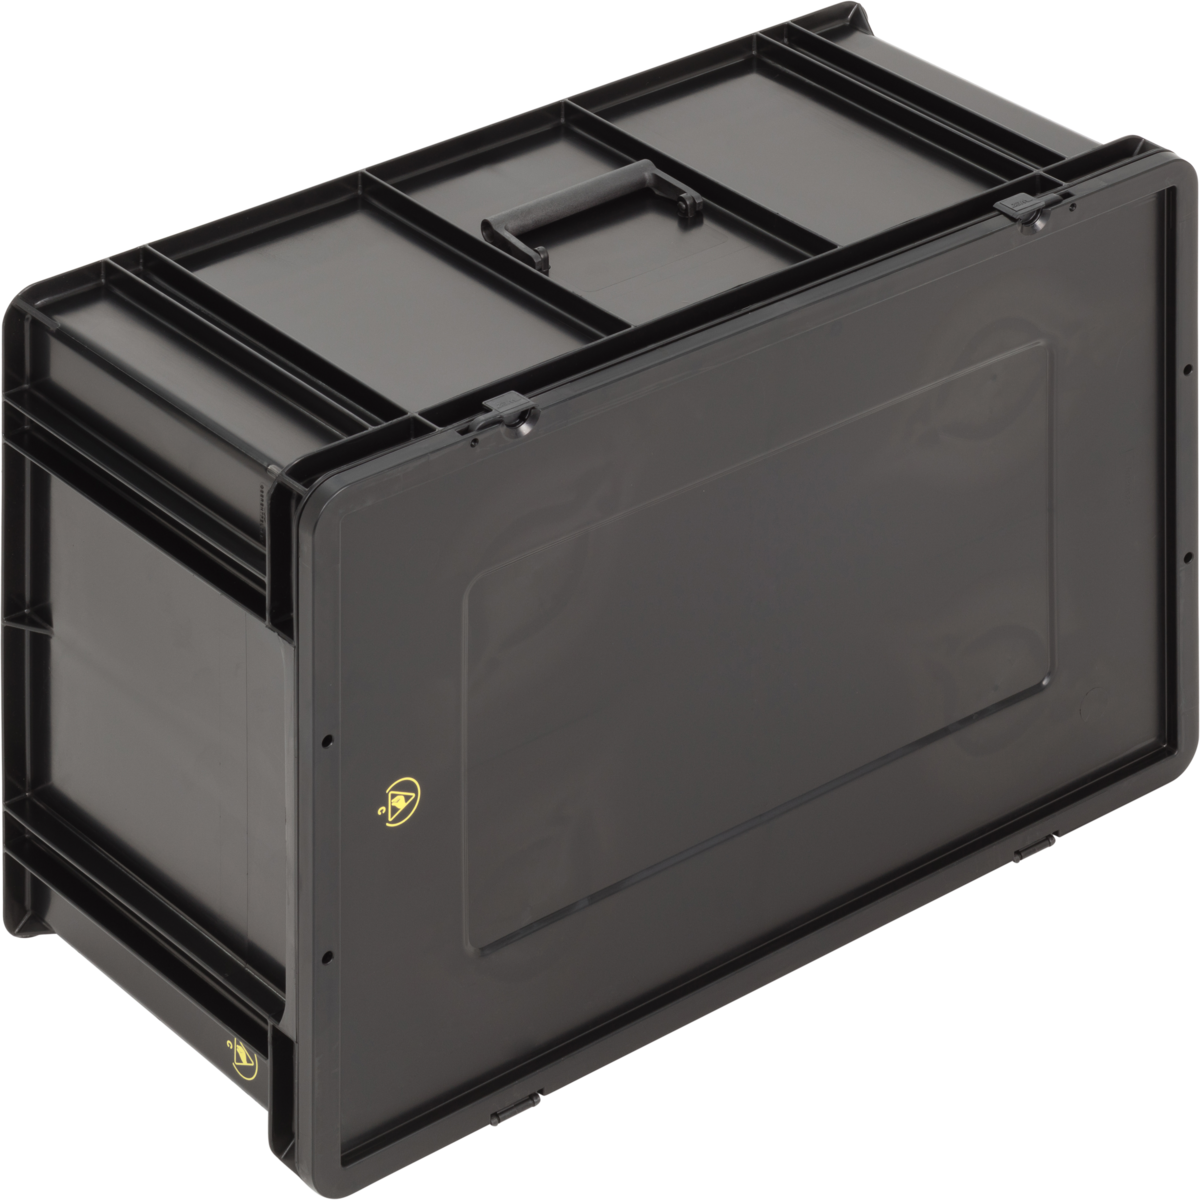 ESD-Safe-SGL-Norm-Carrying-Cases-Flat-Base-007-Ref.-6426.397.992_1004511_600x400x288_03